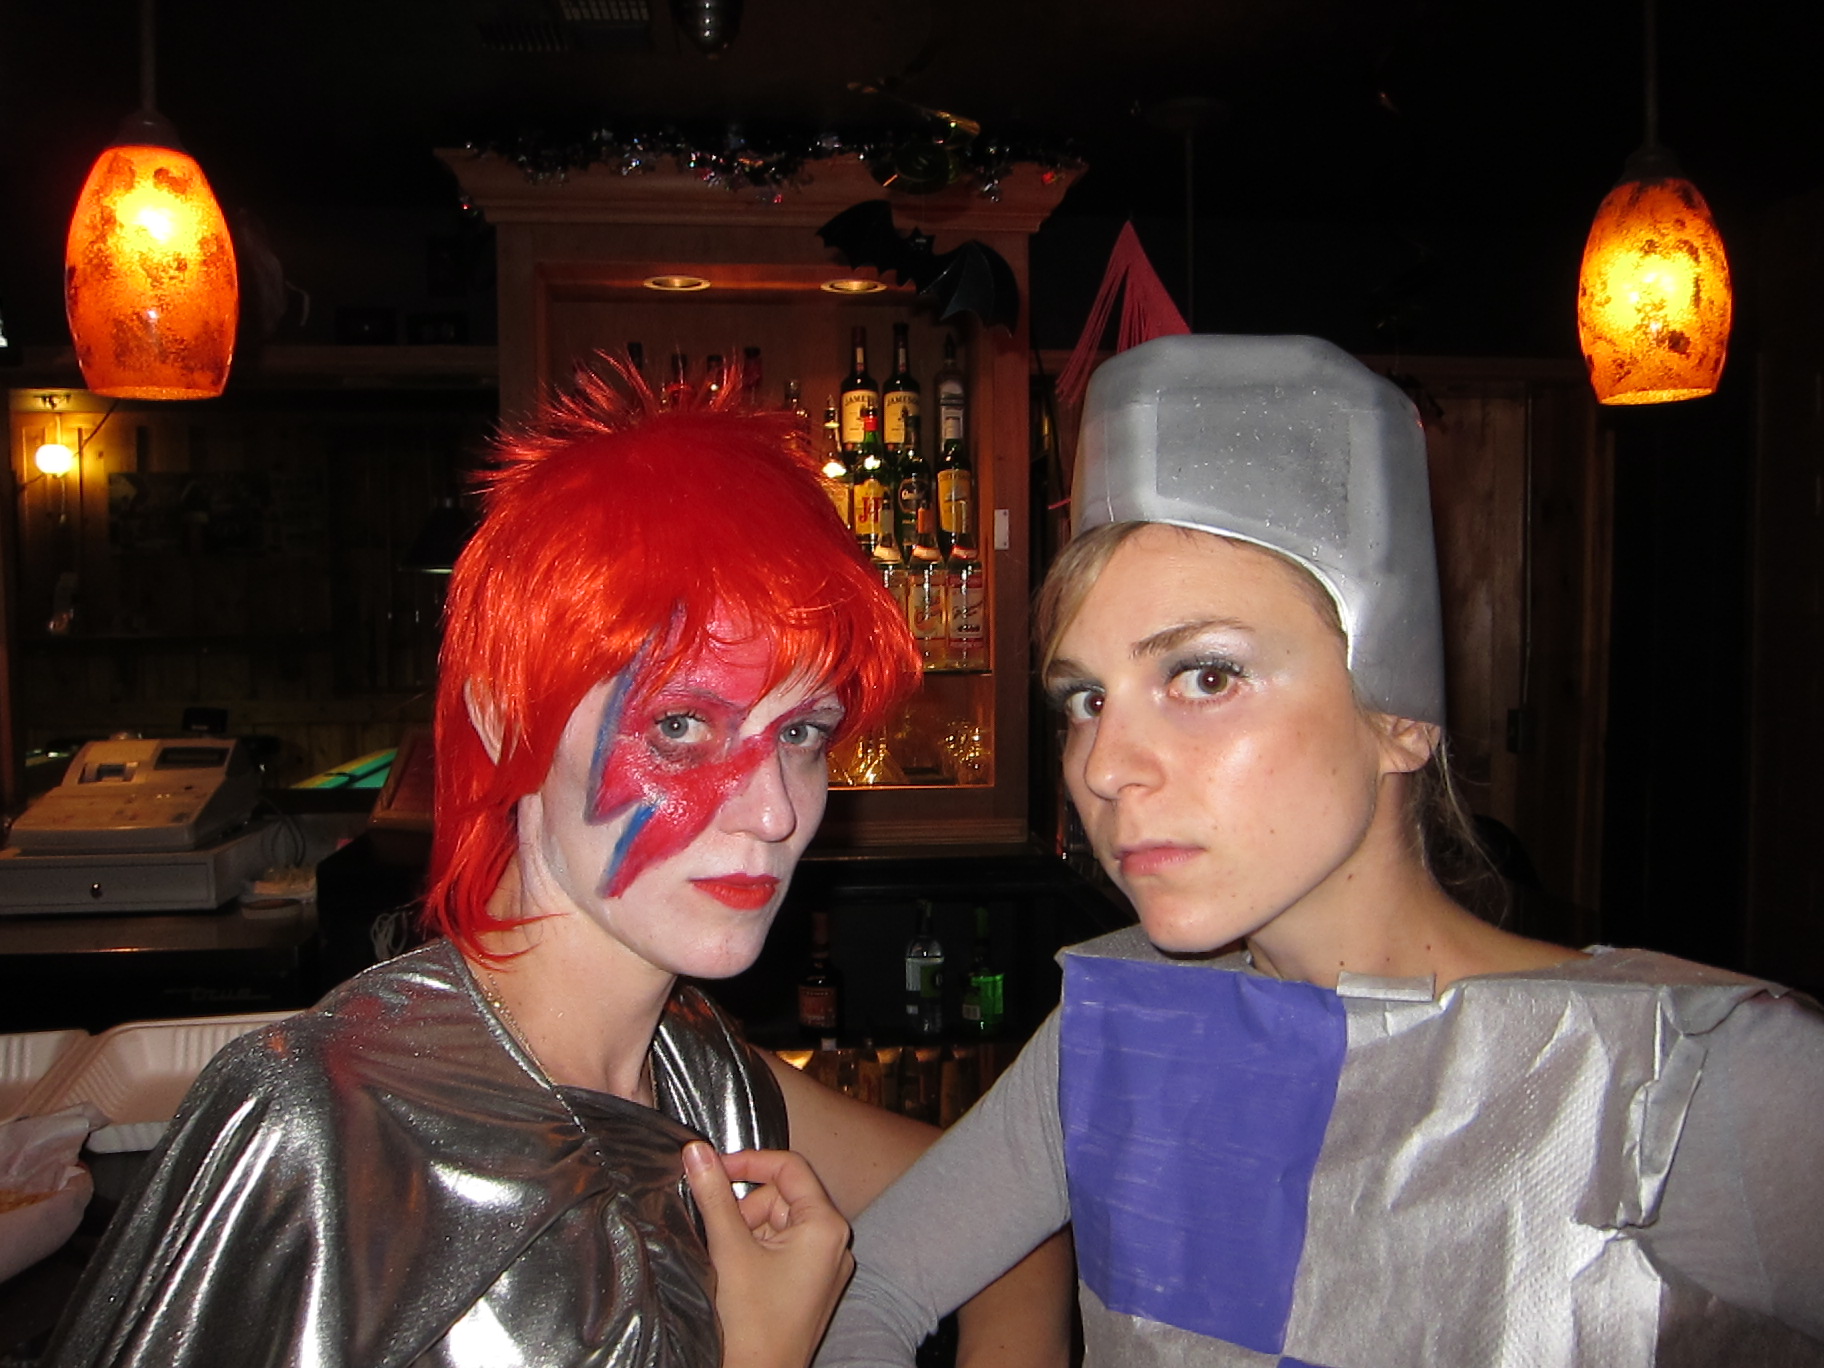 David Bowie and Sir Crafts-a-lot: Our Halloweenie costumes on the holiday I found out I was pregnant